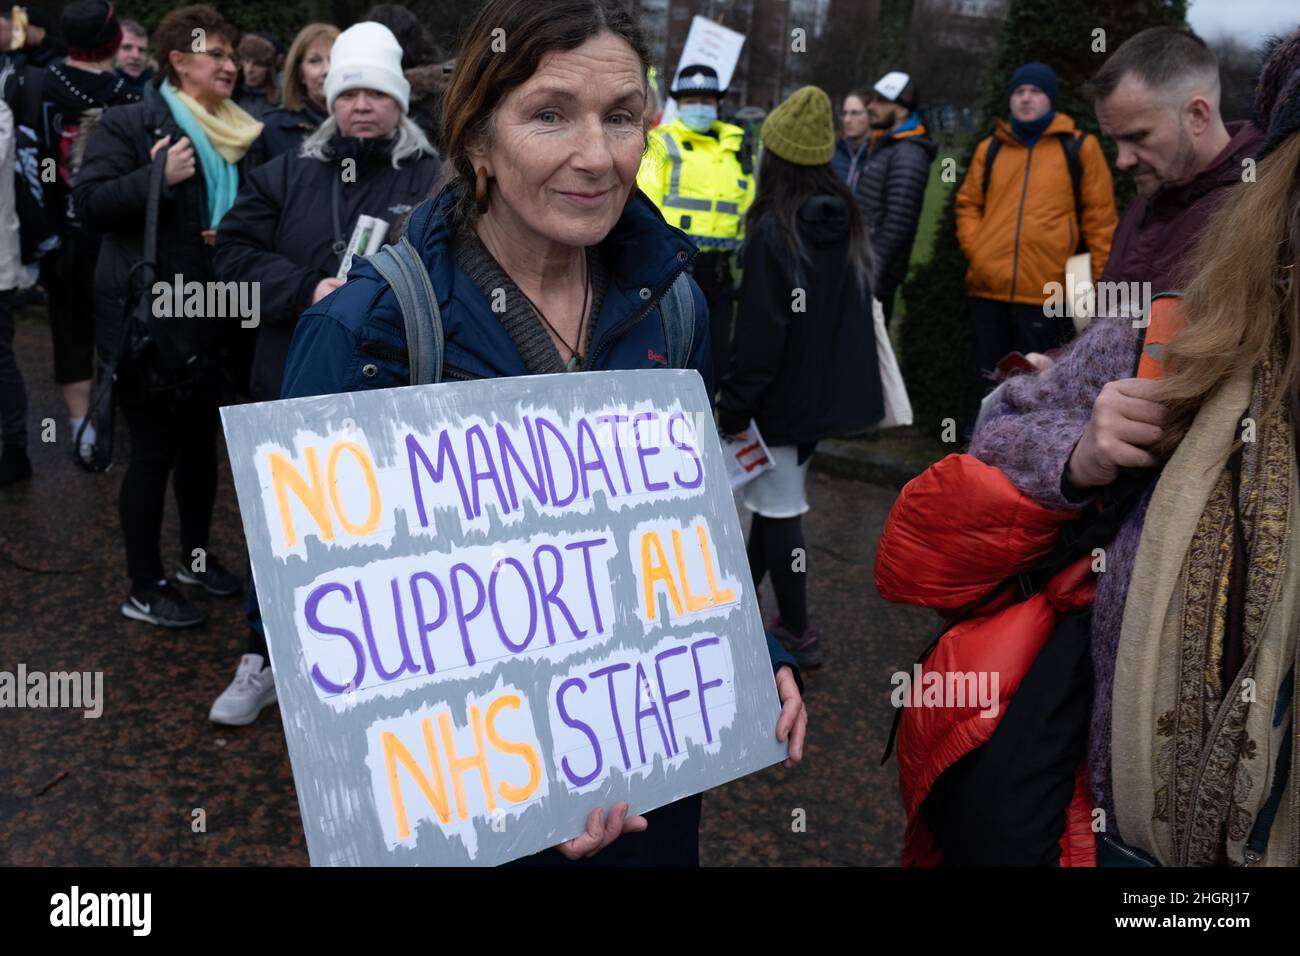 Glasgow, UK. Scotland Against Lockdown ‘Freedom Rally’, against lockdown, the use of facemasks and vaccine passports and anti-vaccines, during the CoronaVirus Covid-19 Omicron stage of the health pandemic, in Glasgow, Scotland, 22 January 2022. Credit: Jeremy Sutton-Hibbert/ Alamy Live News. Stock Photo